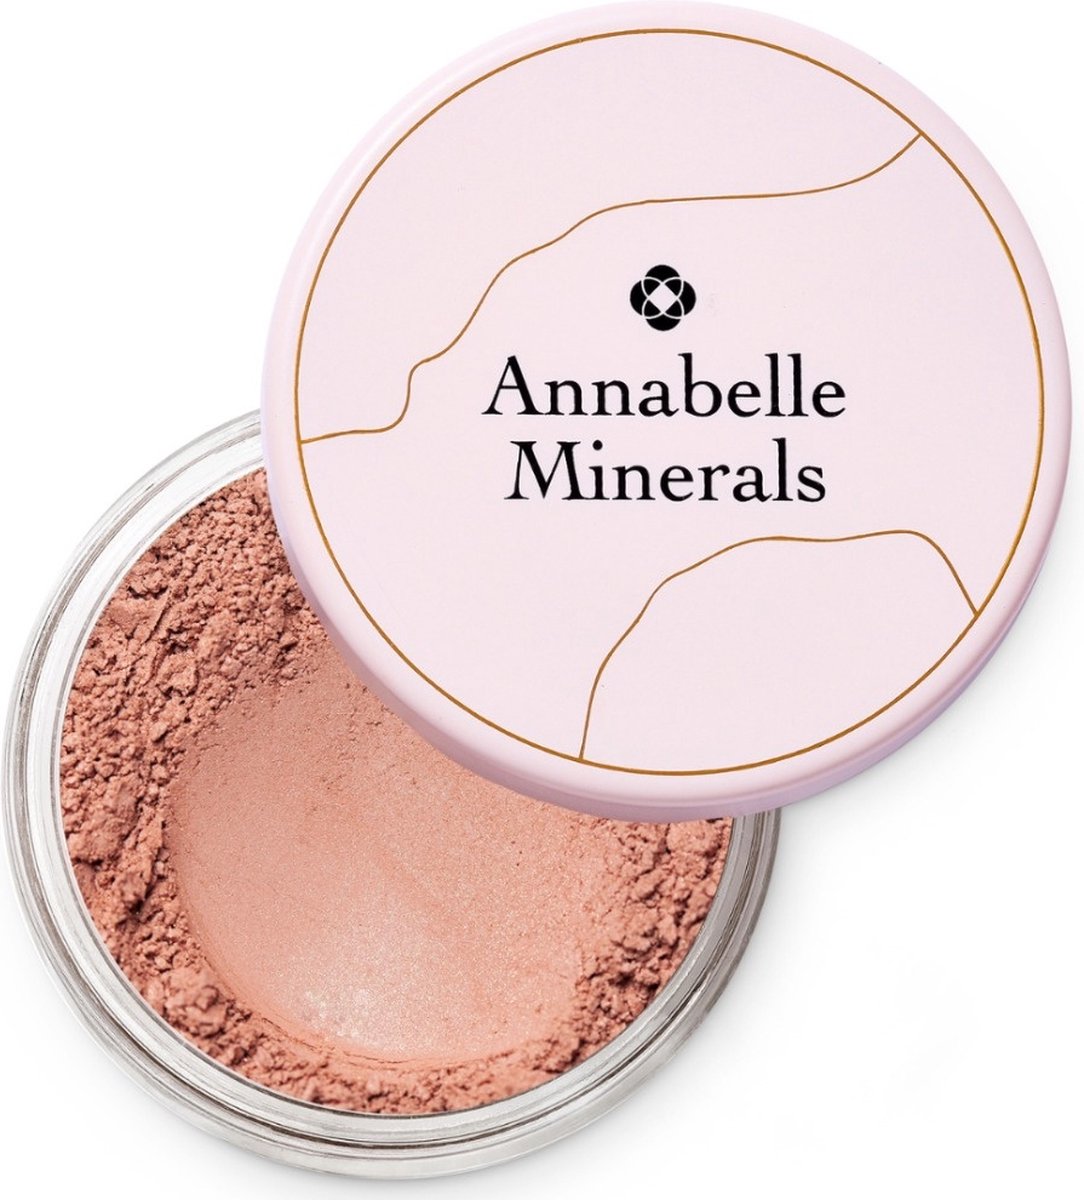 Annabelle Minerals - Mineral Eyeshadow Light Colors - 3g